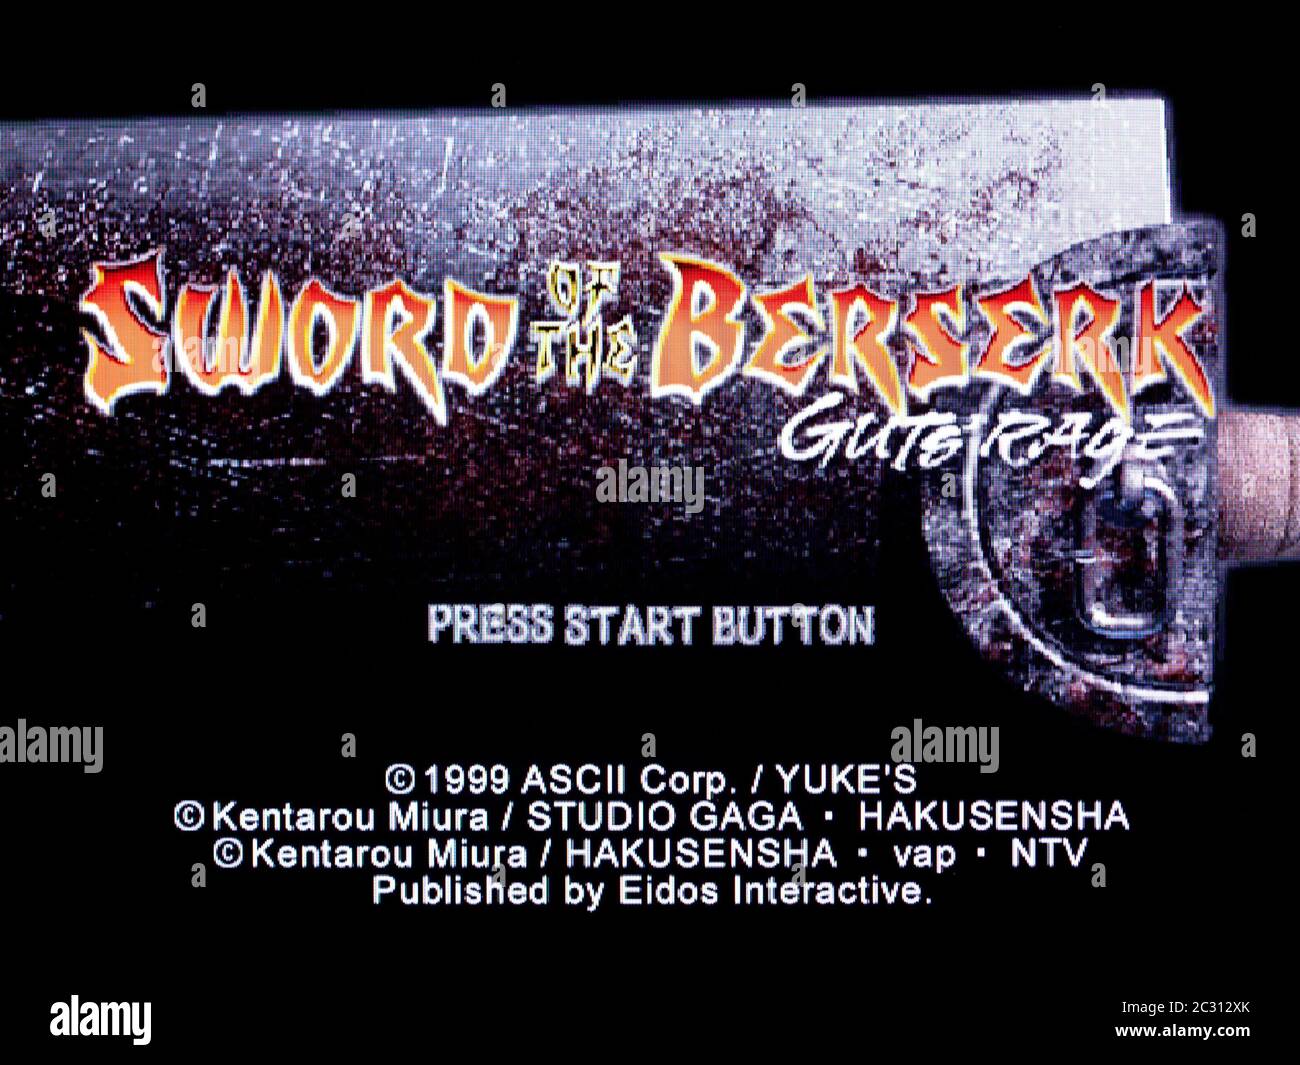 Sword of the Berzerk Guts Rage - Sega Dreamcast Videogame - Editorial use only Stock Photo